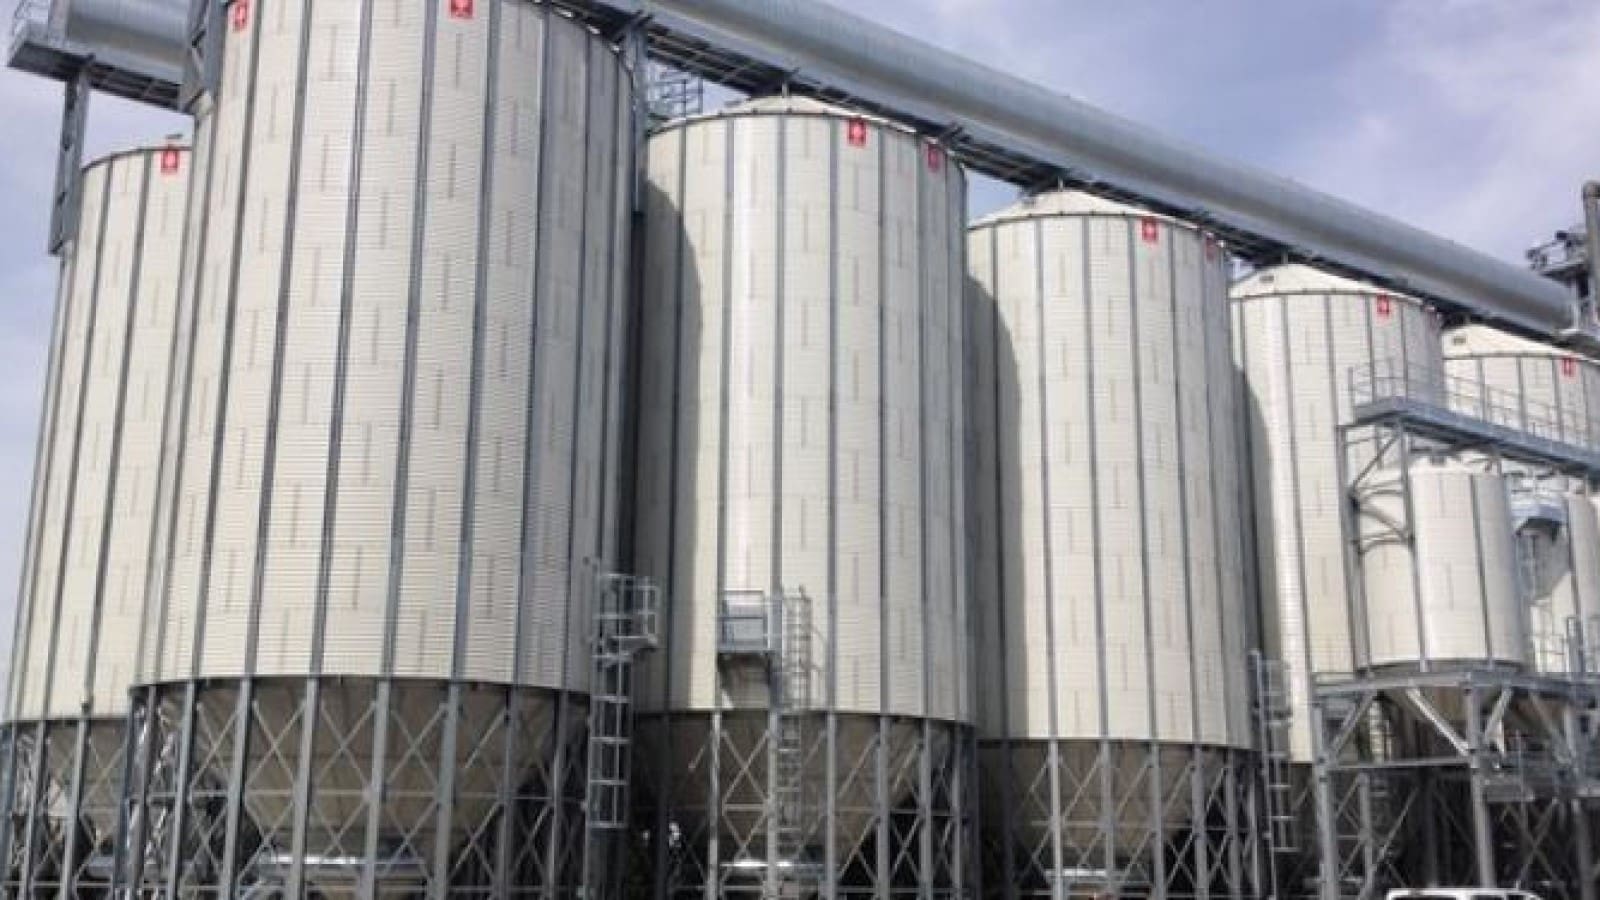 Simeza Silos to construct one of Europe’s largest hopper bottom silos in Spain  